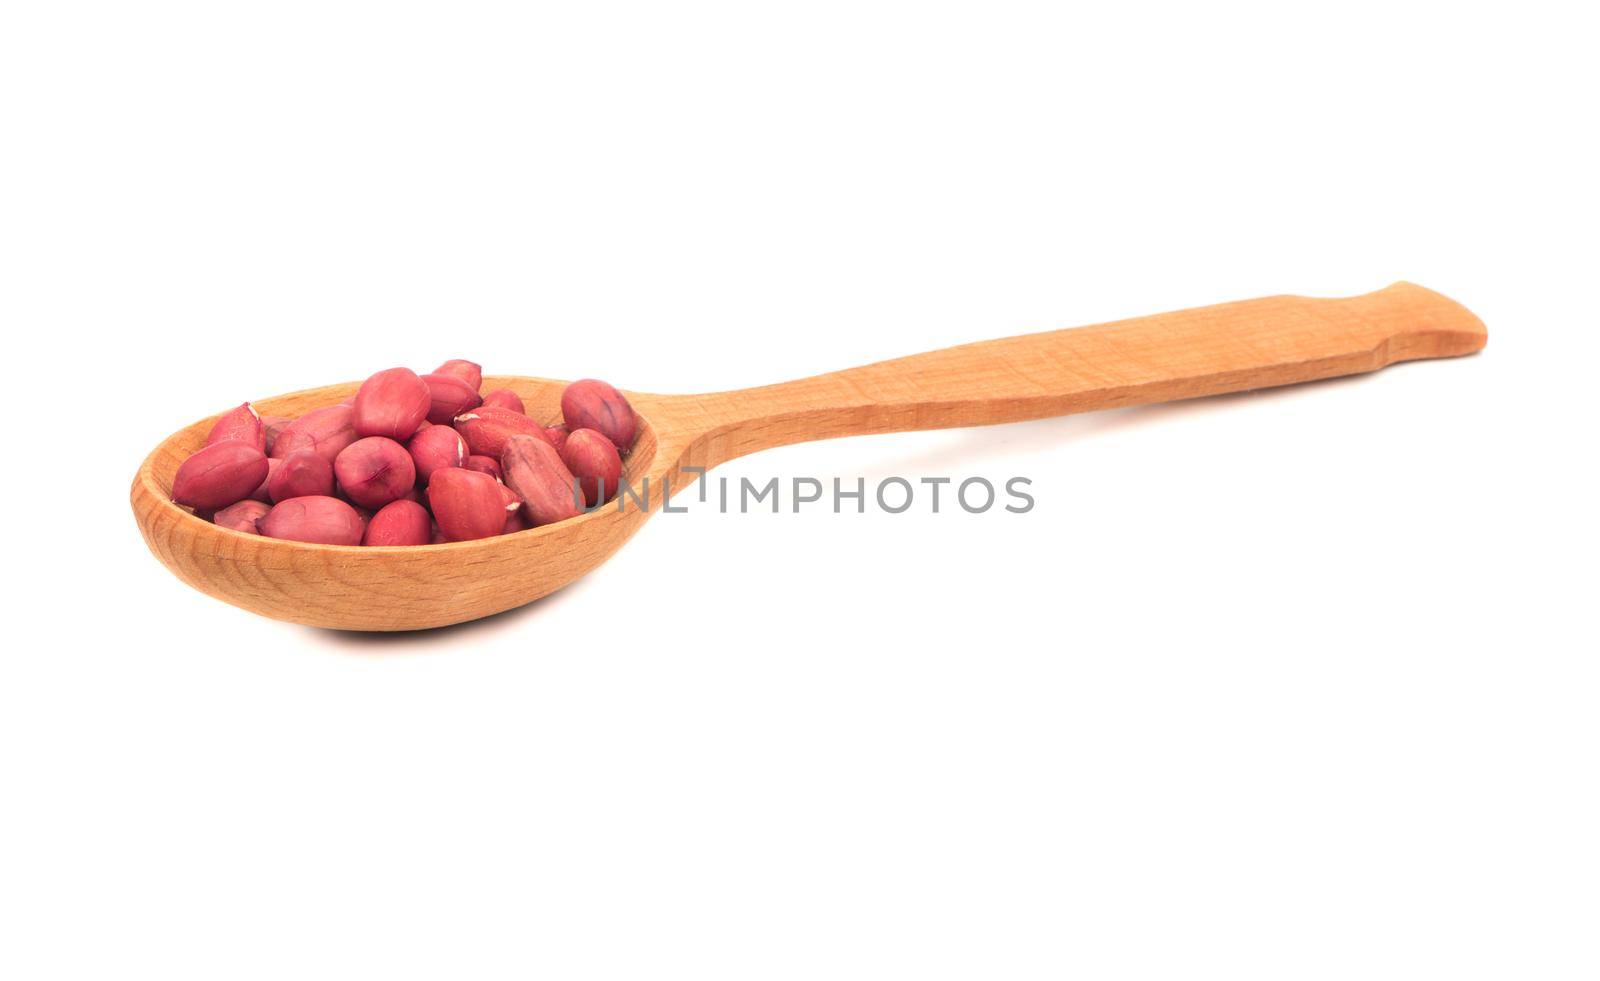 Kernel peanut in wooden spoon isolated on white background